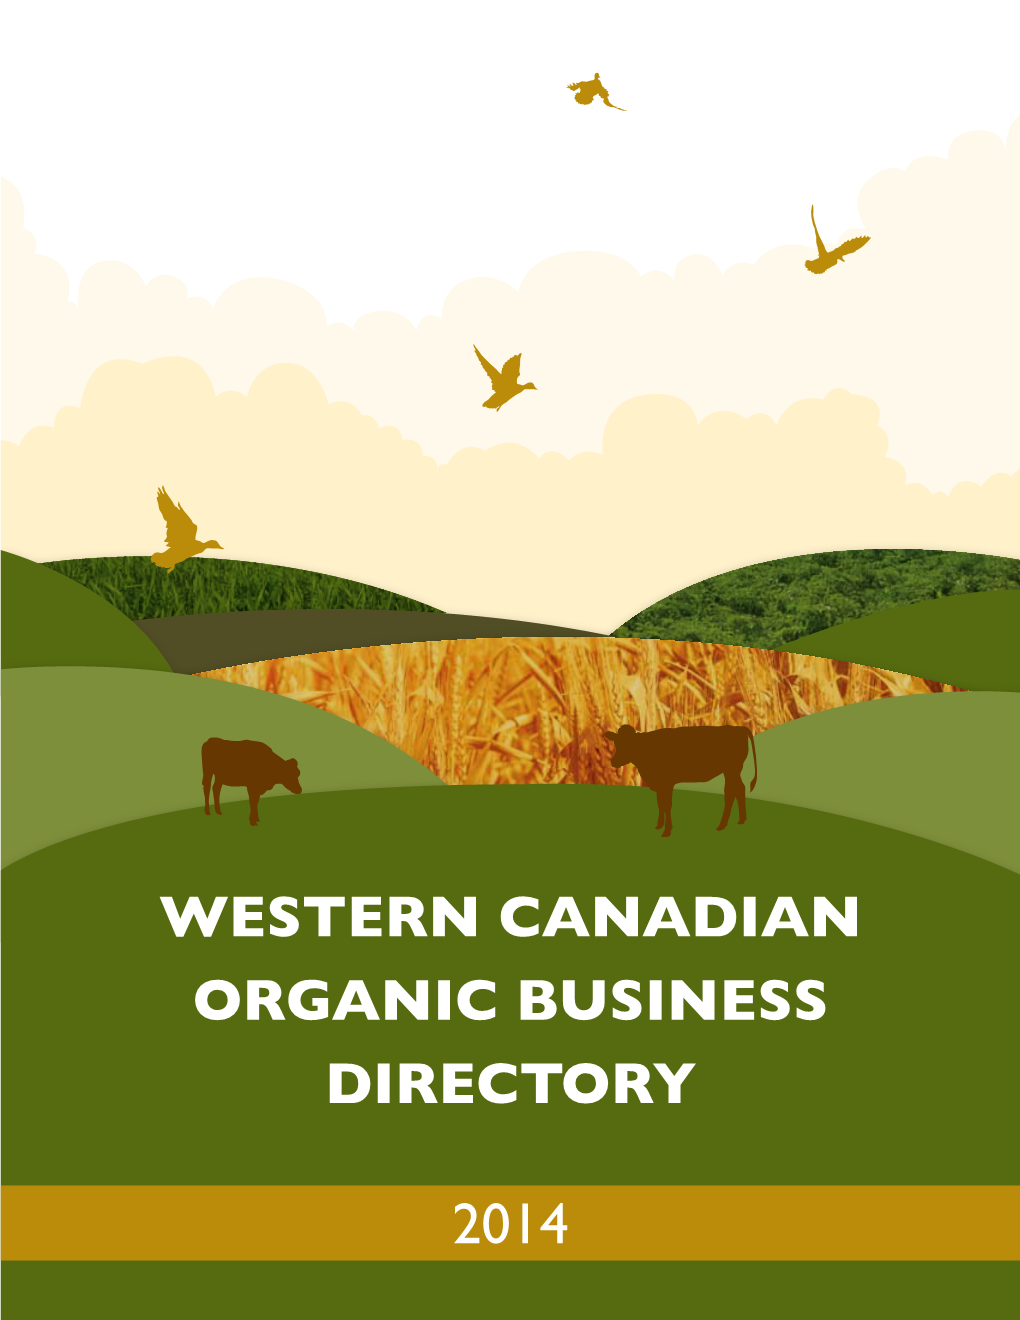 Western Canadian Organic Business Directory 2014